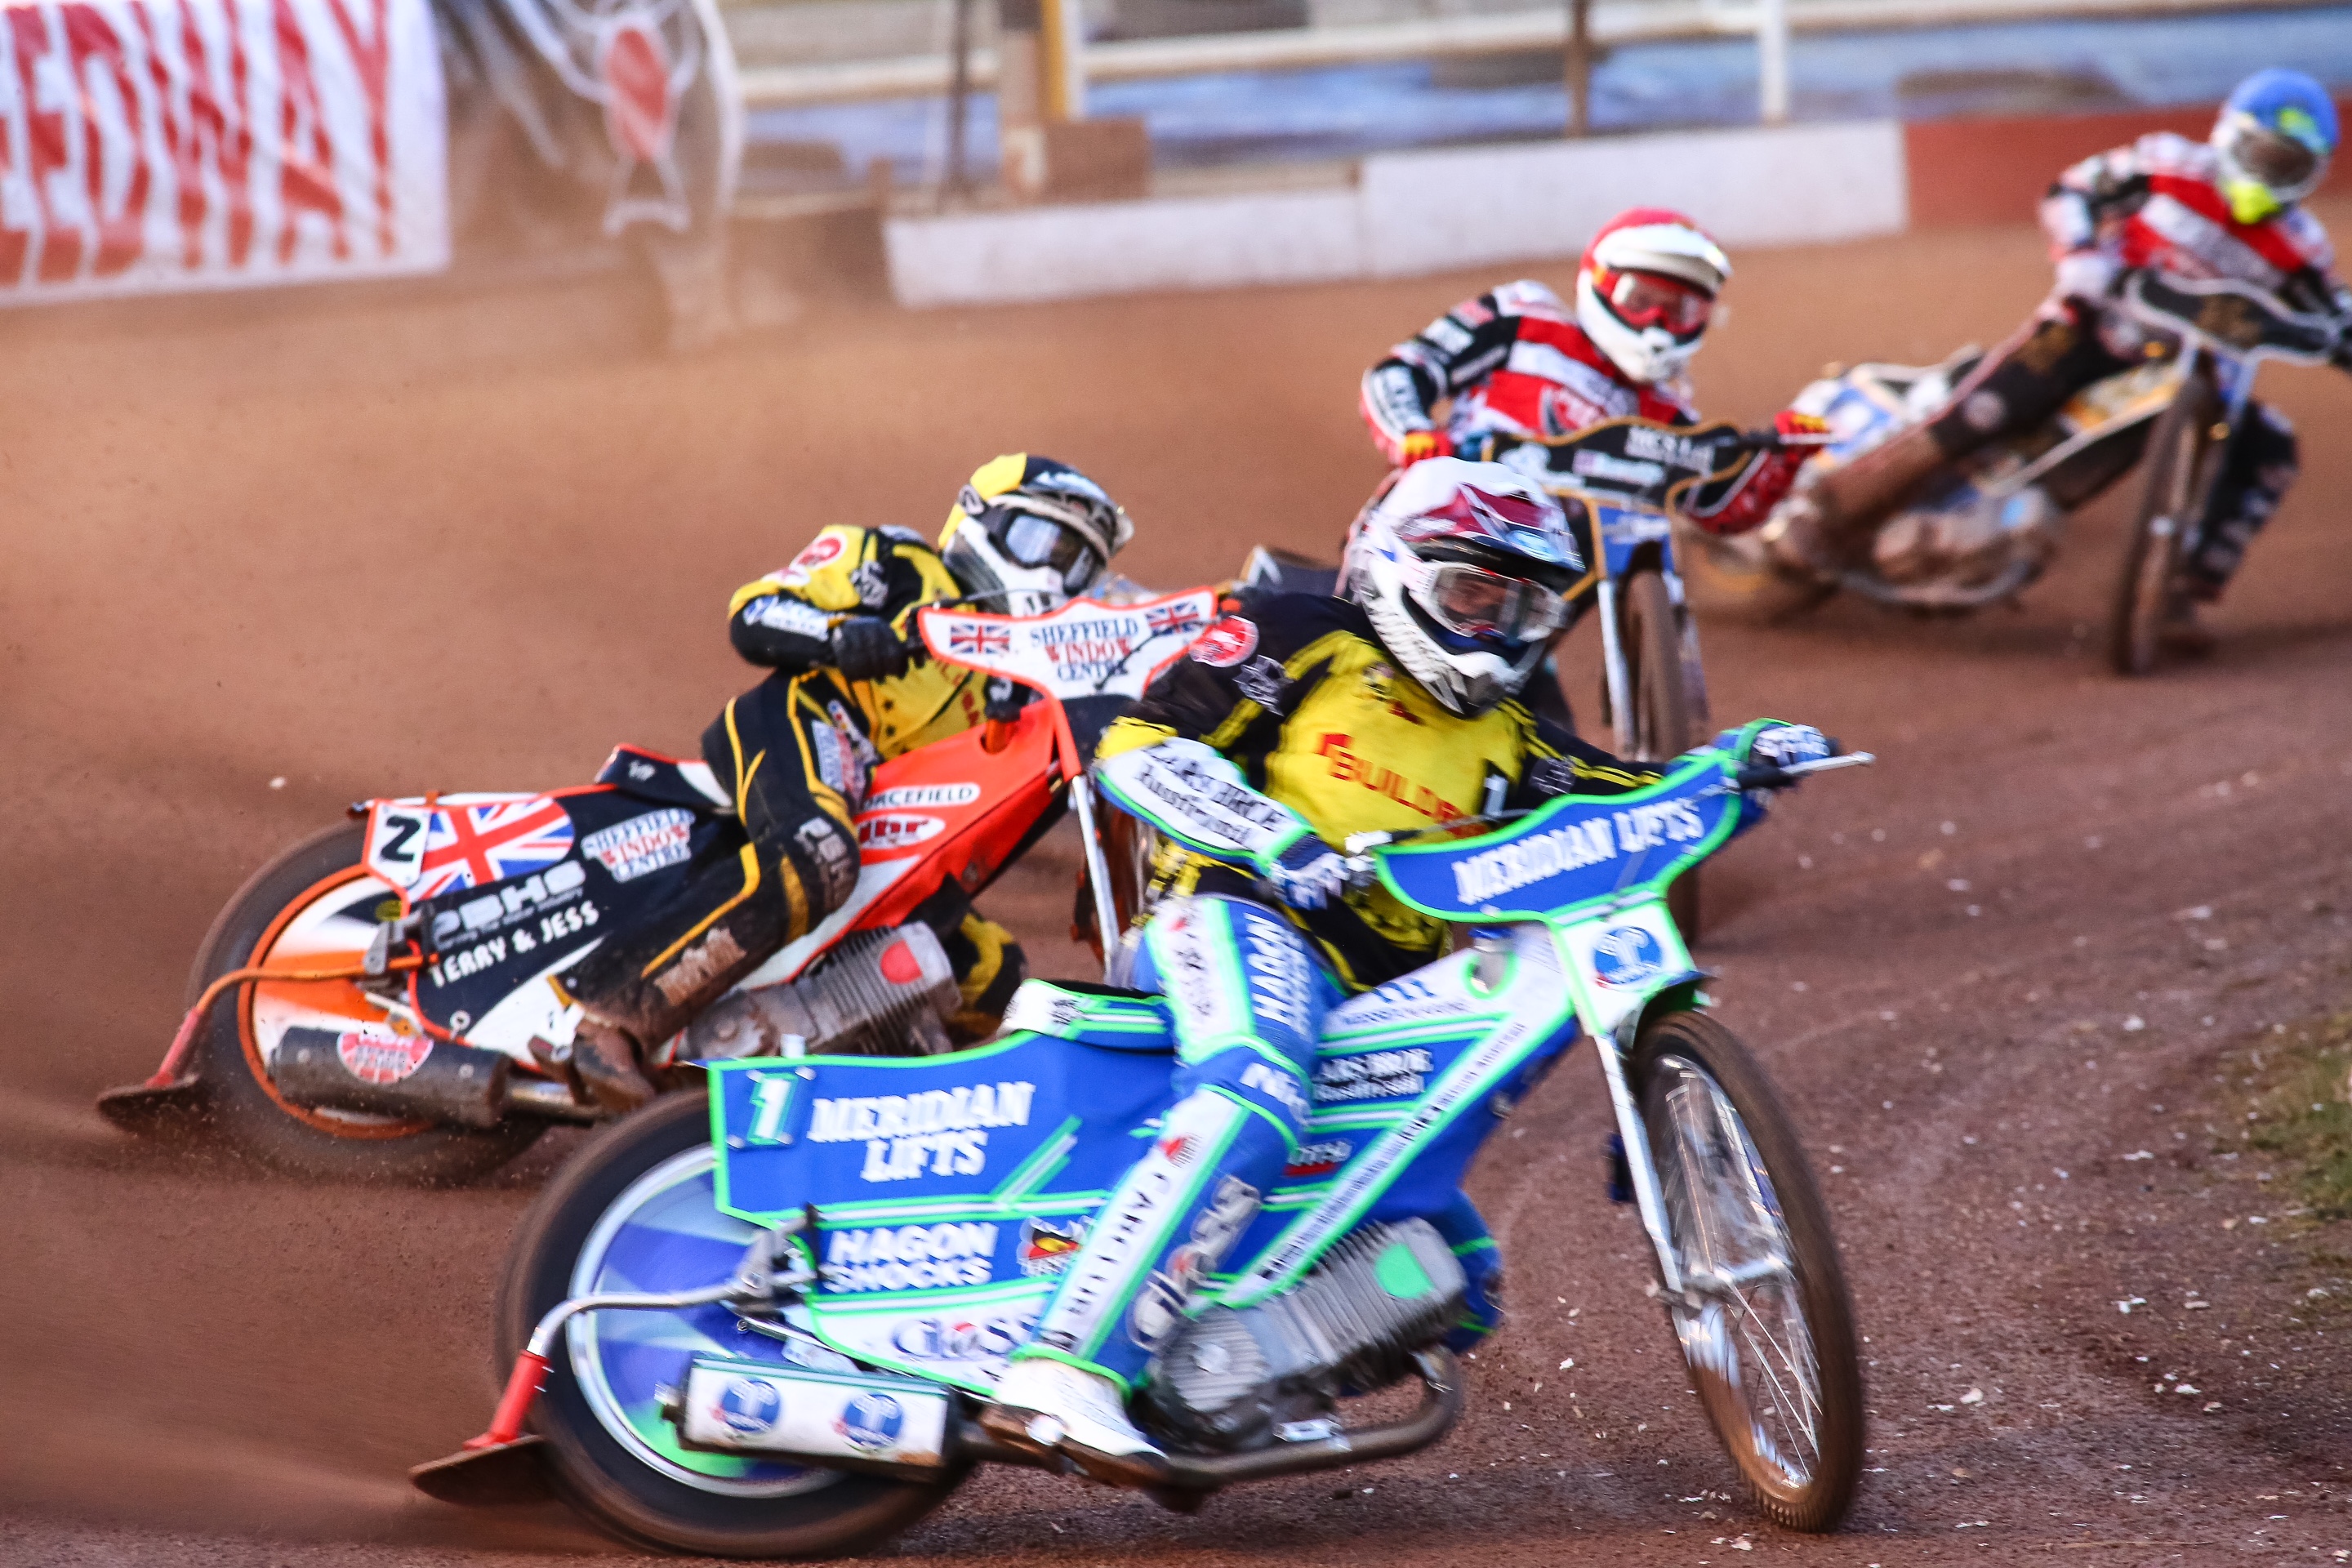 Rossiter praises team effort after victory over Coventry Bees